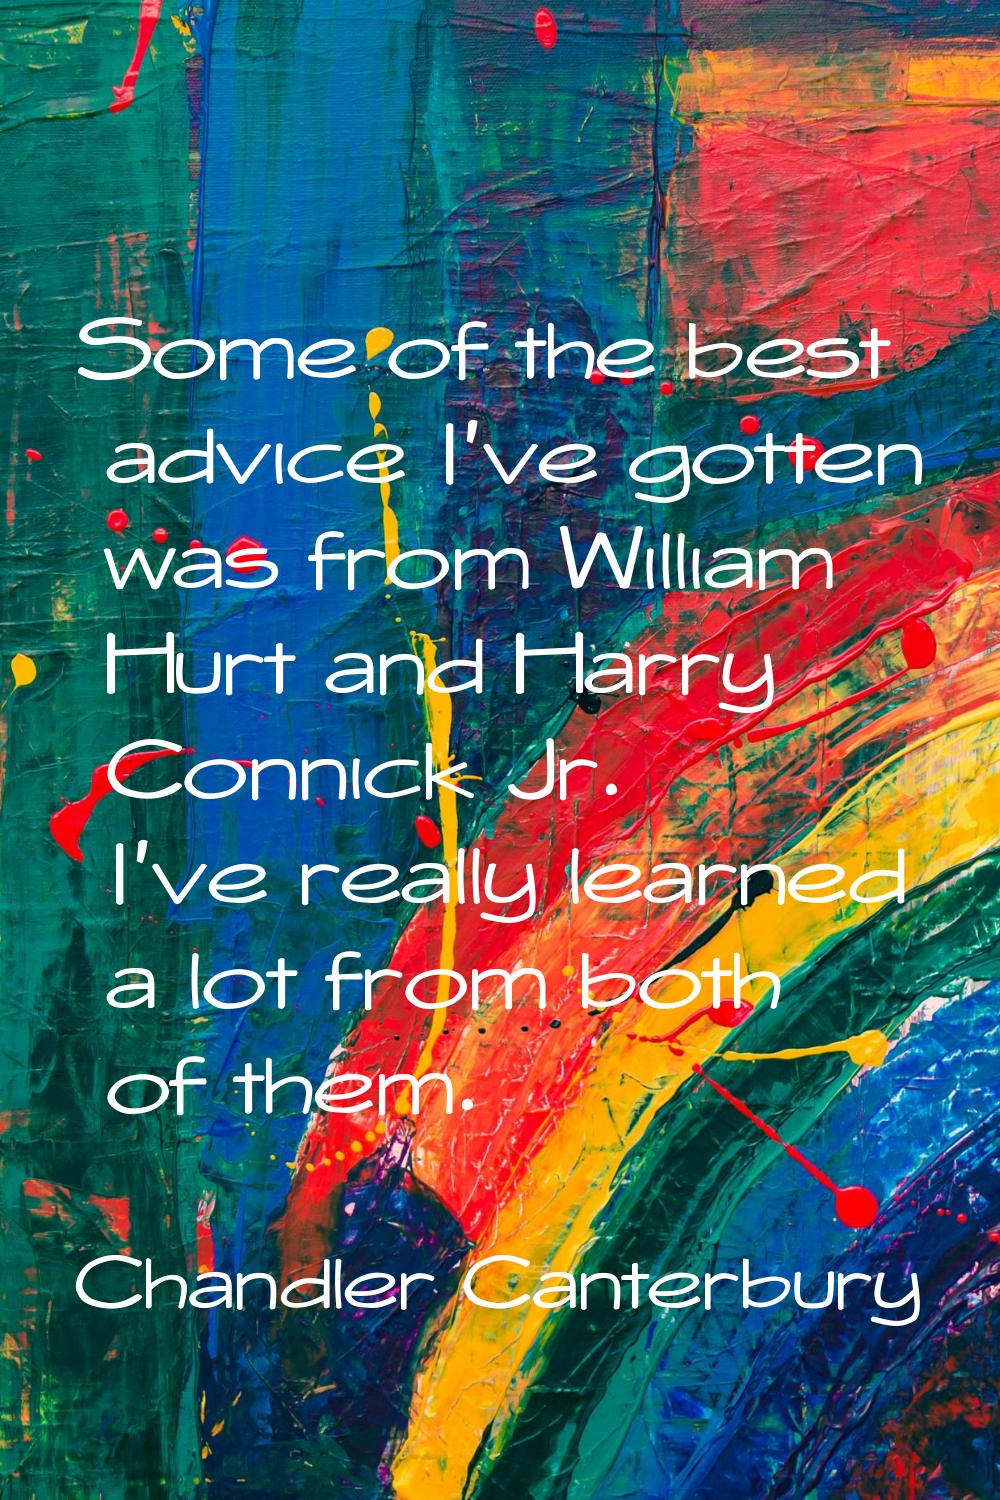 Some of the best advice I've gotten was from William Hurt and Harry Connick Jr. I've really learned